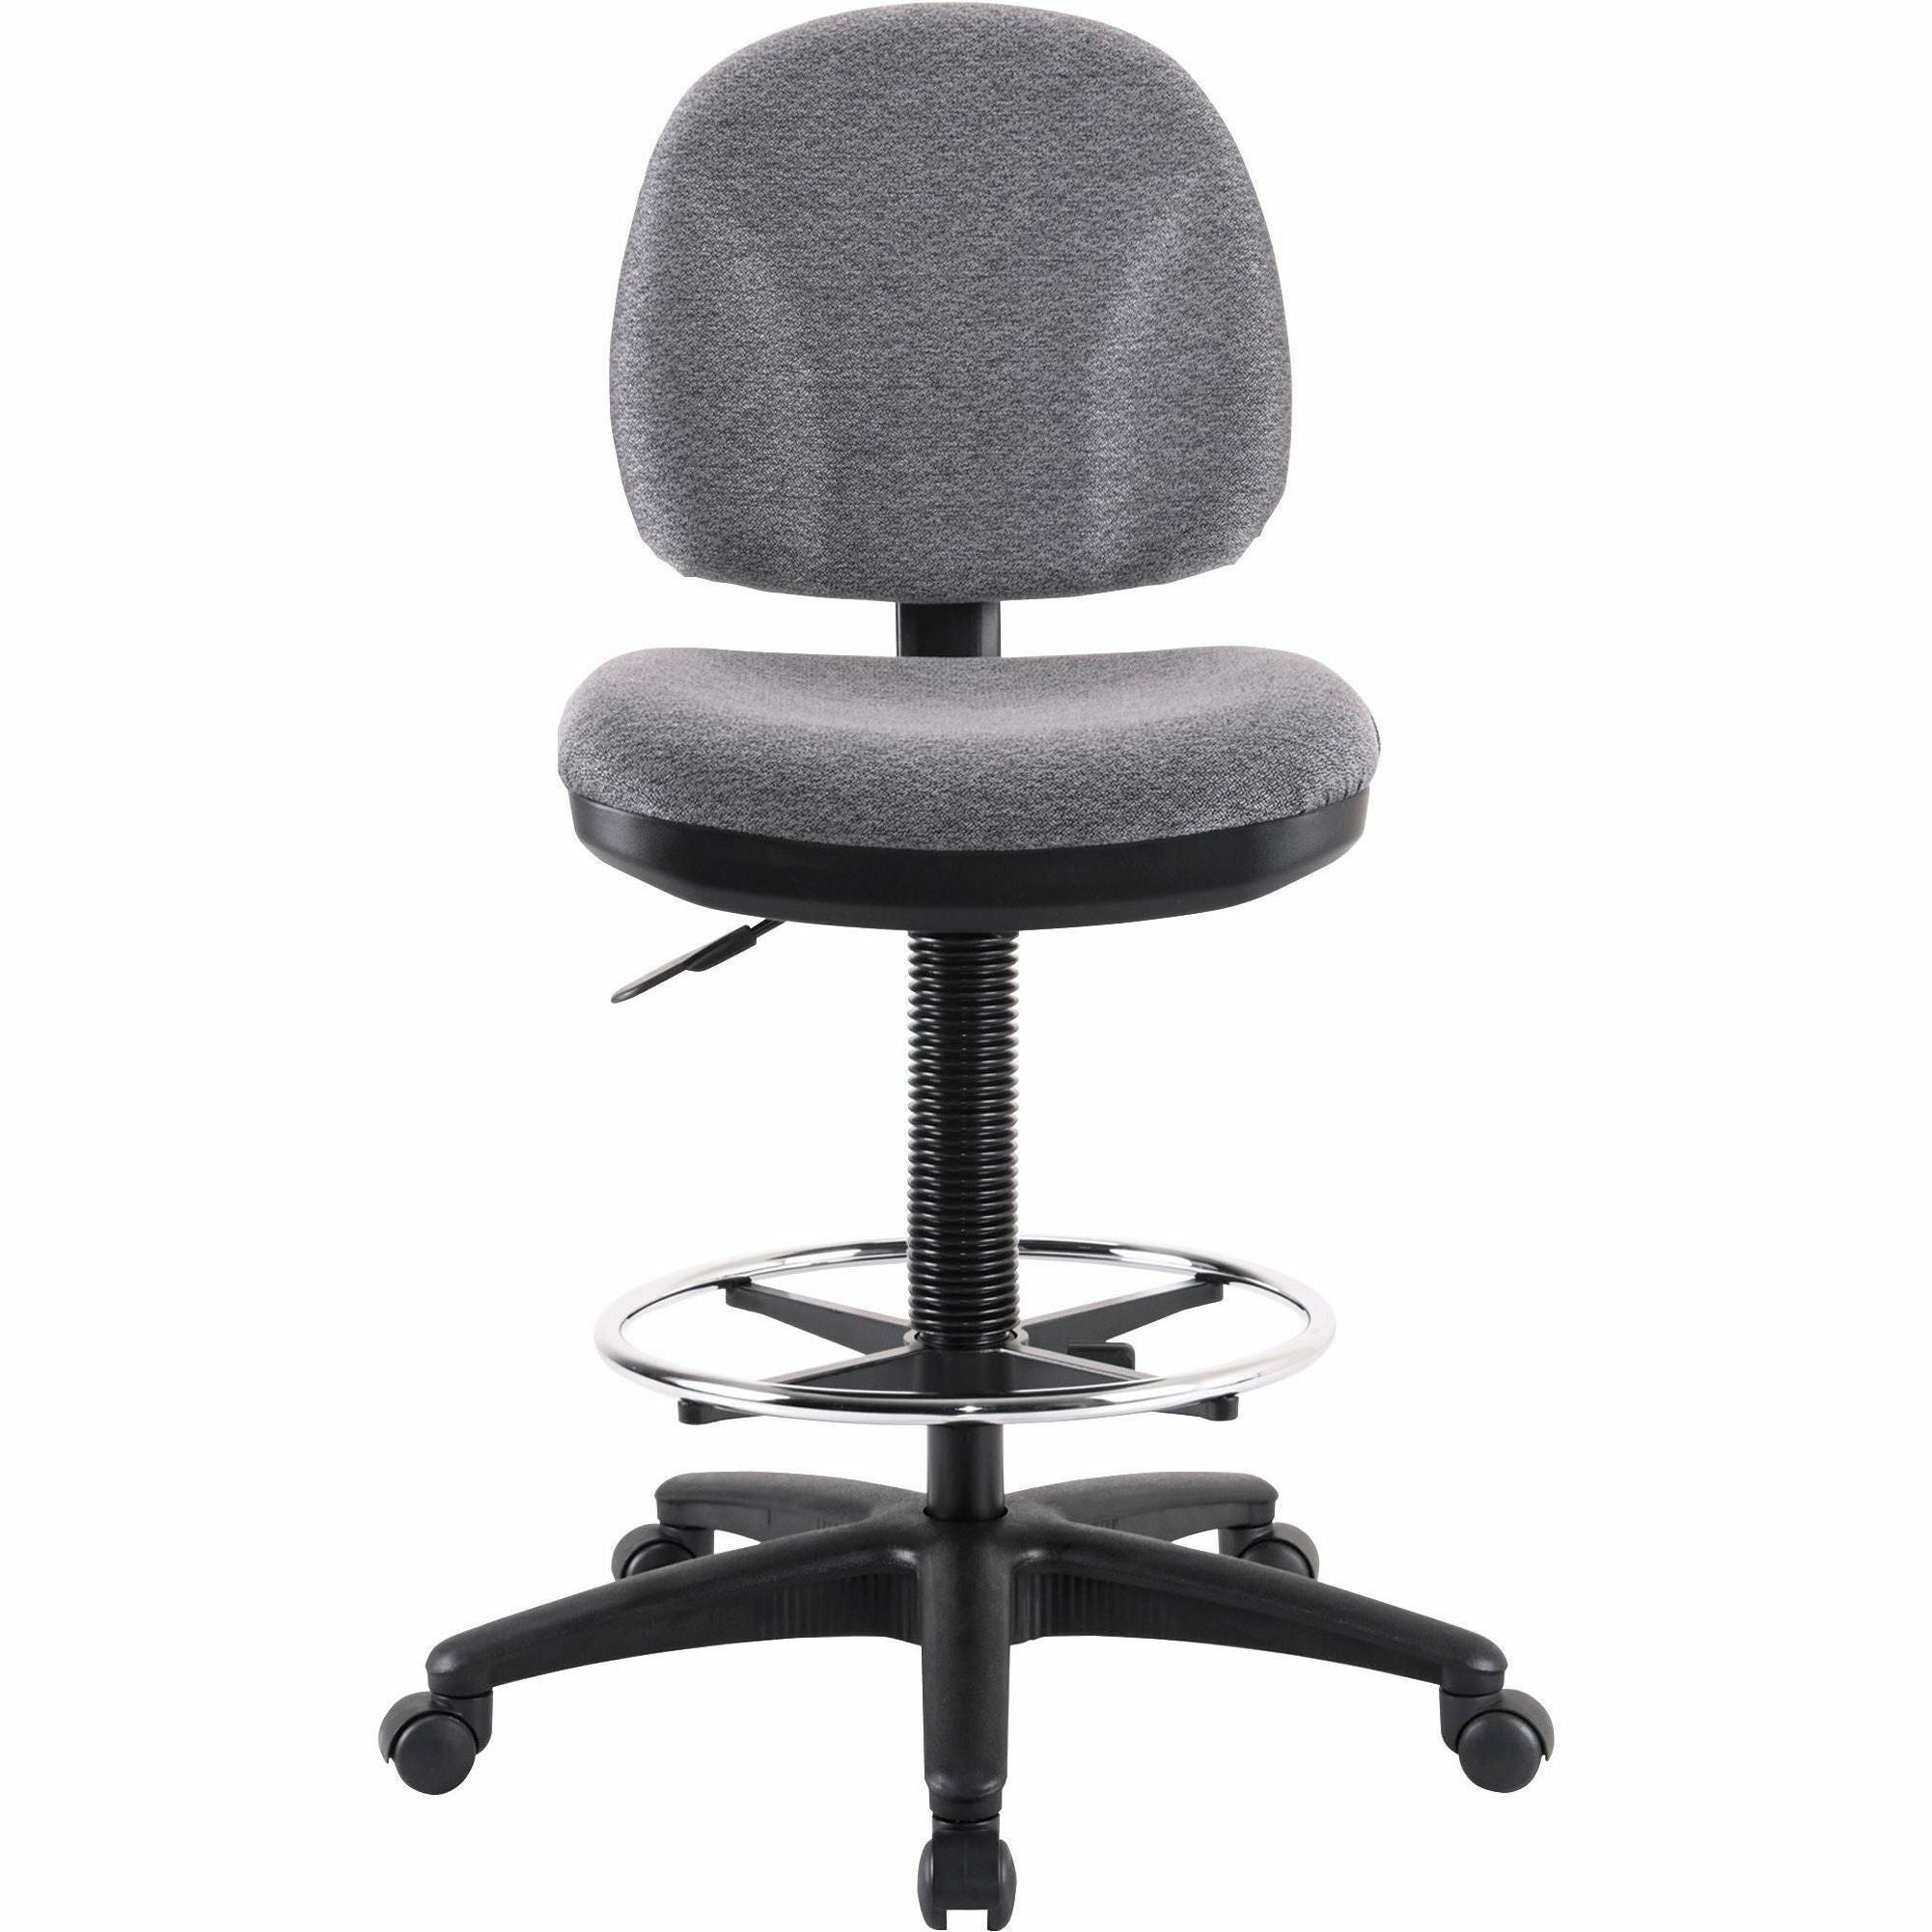 Lorell Millenia Series Adjustable Task Stool with Back - Gray Seat - Gray - 1 Each - 